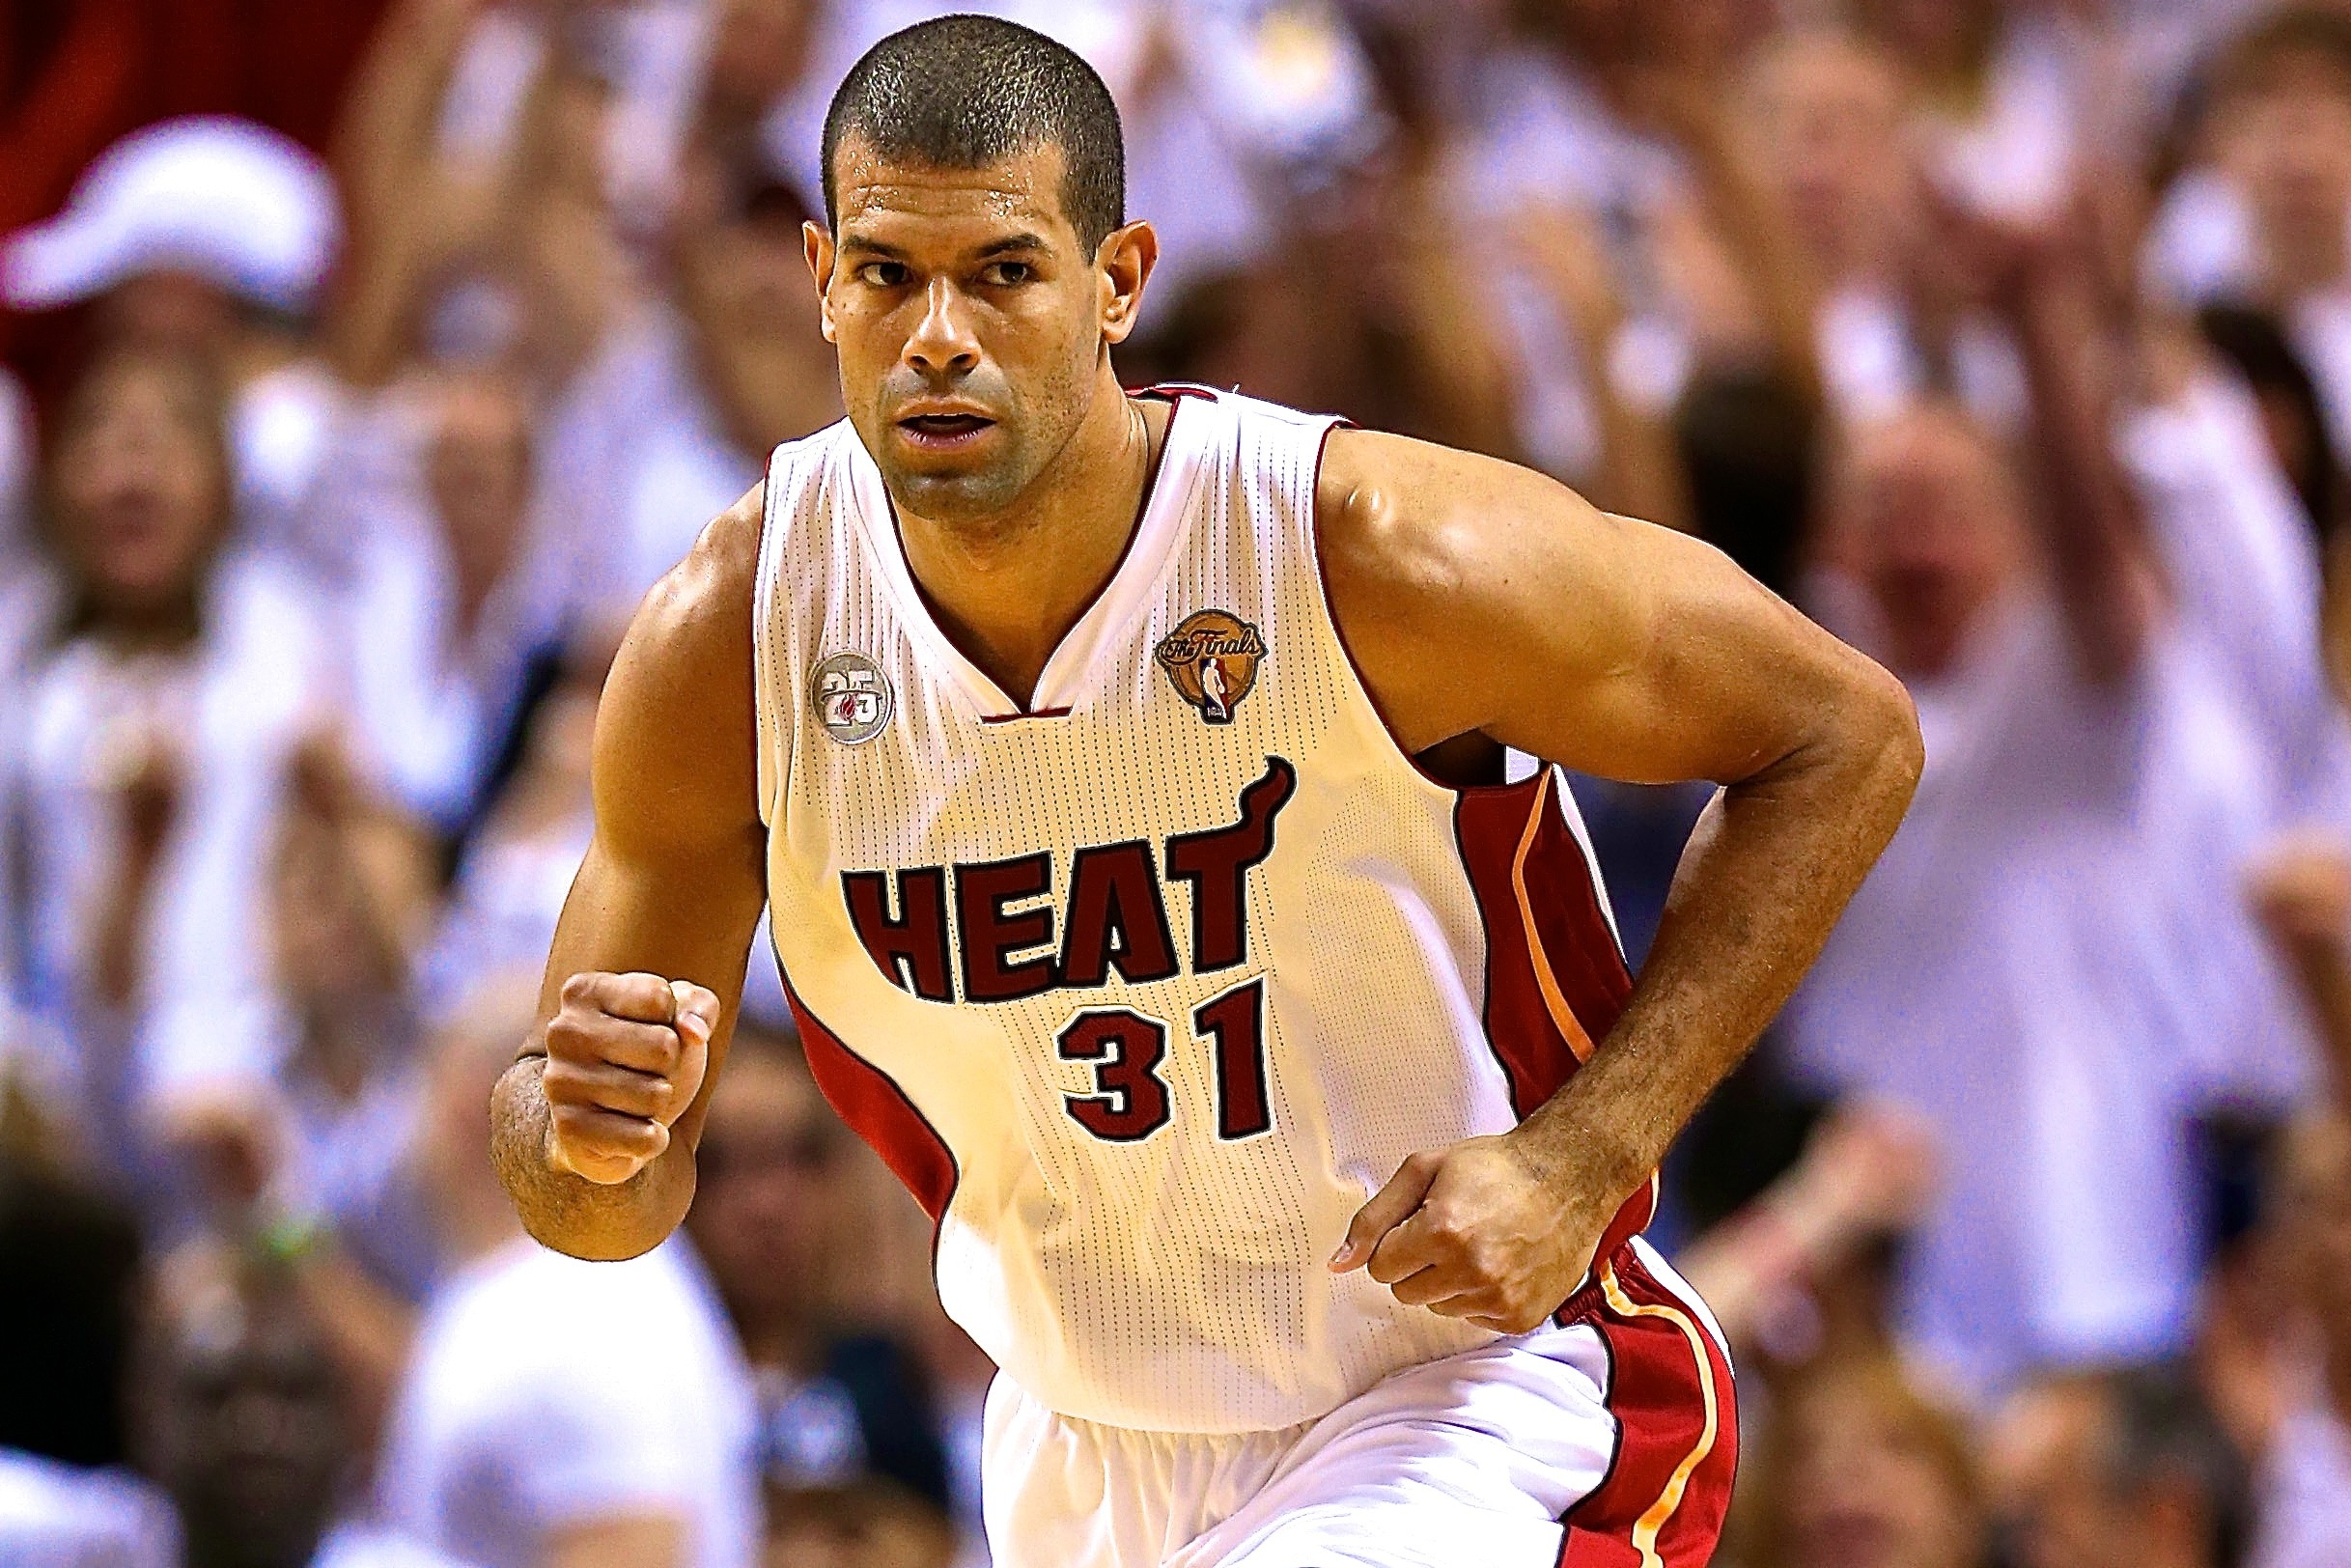 An Athlete's Mentality with Shane Battier